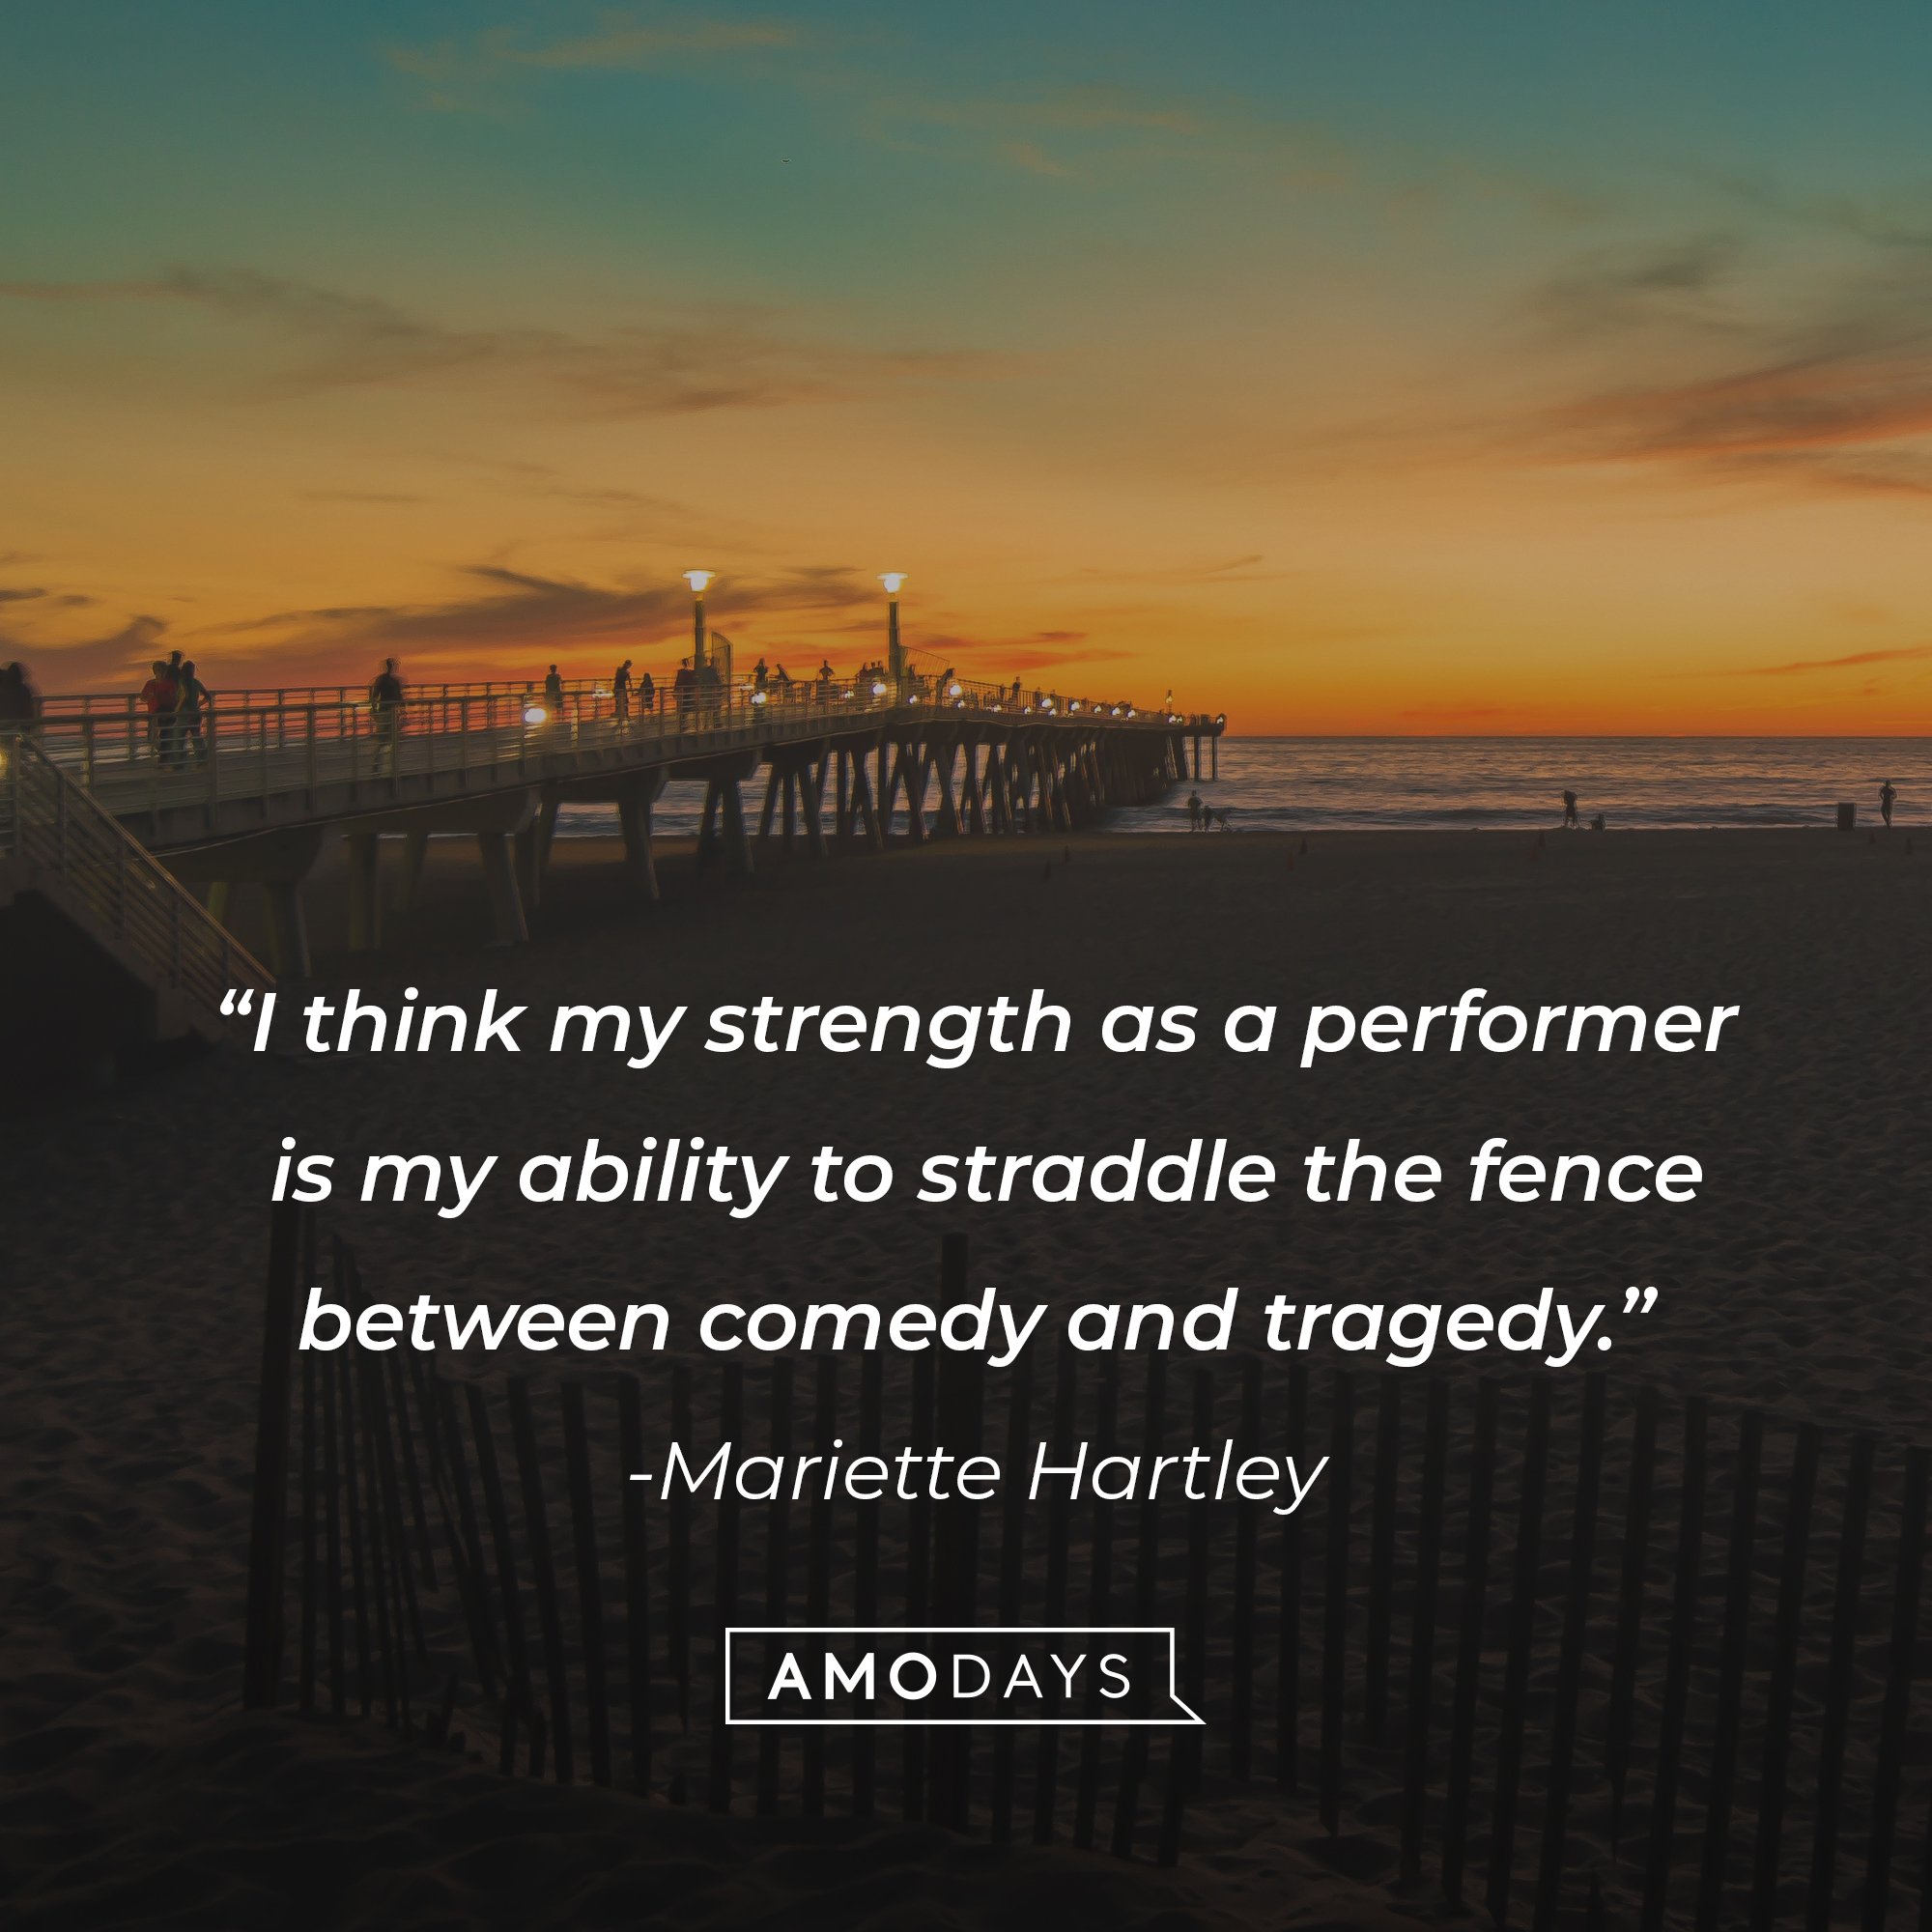 Mariette Hartley's quote: “I think my strength as a performer is my ability to straddle the fence between comedy and tragedy.” | Image: AmoDays